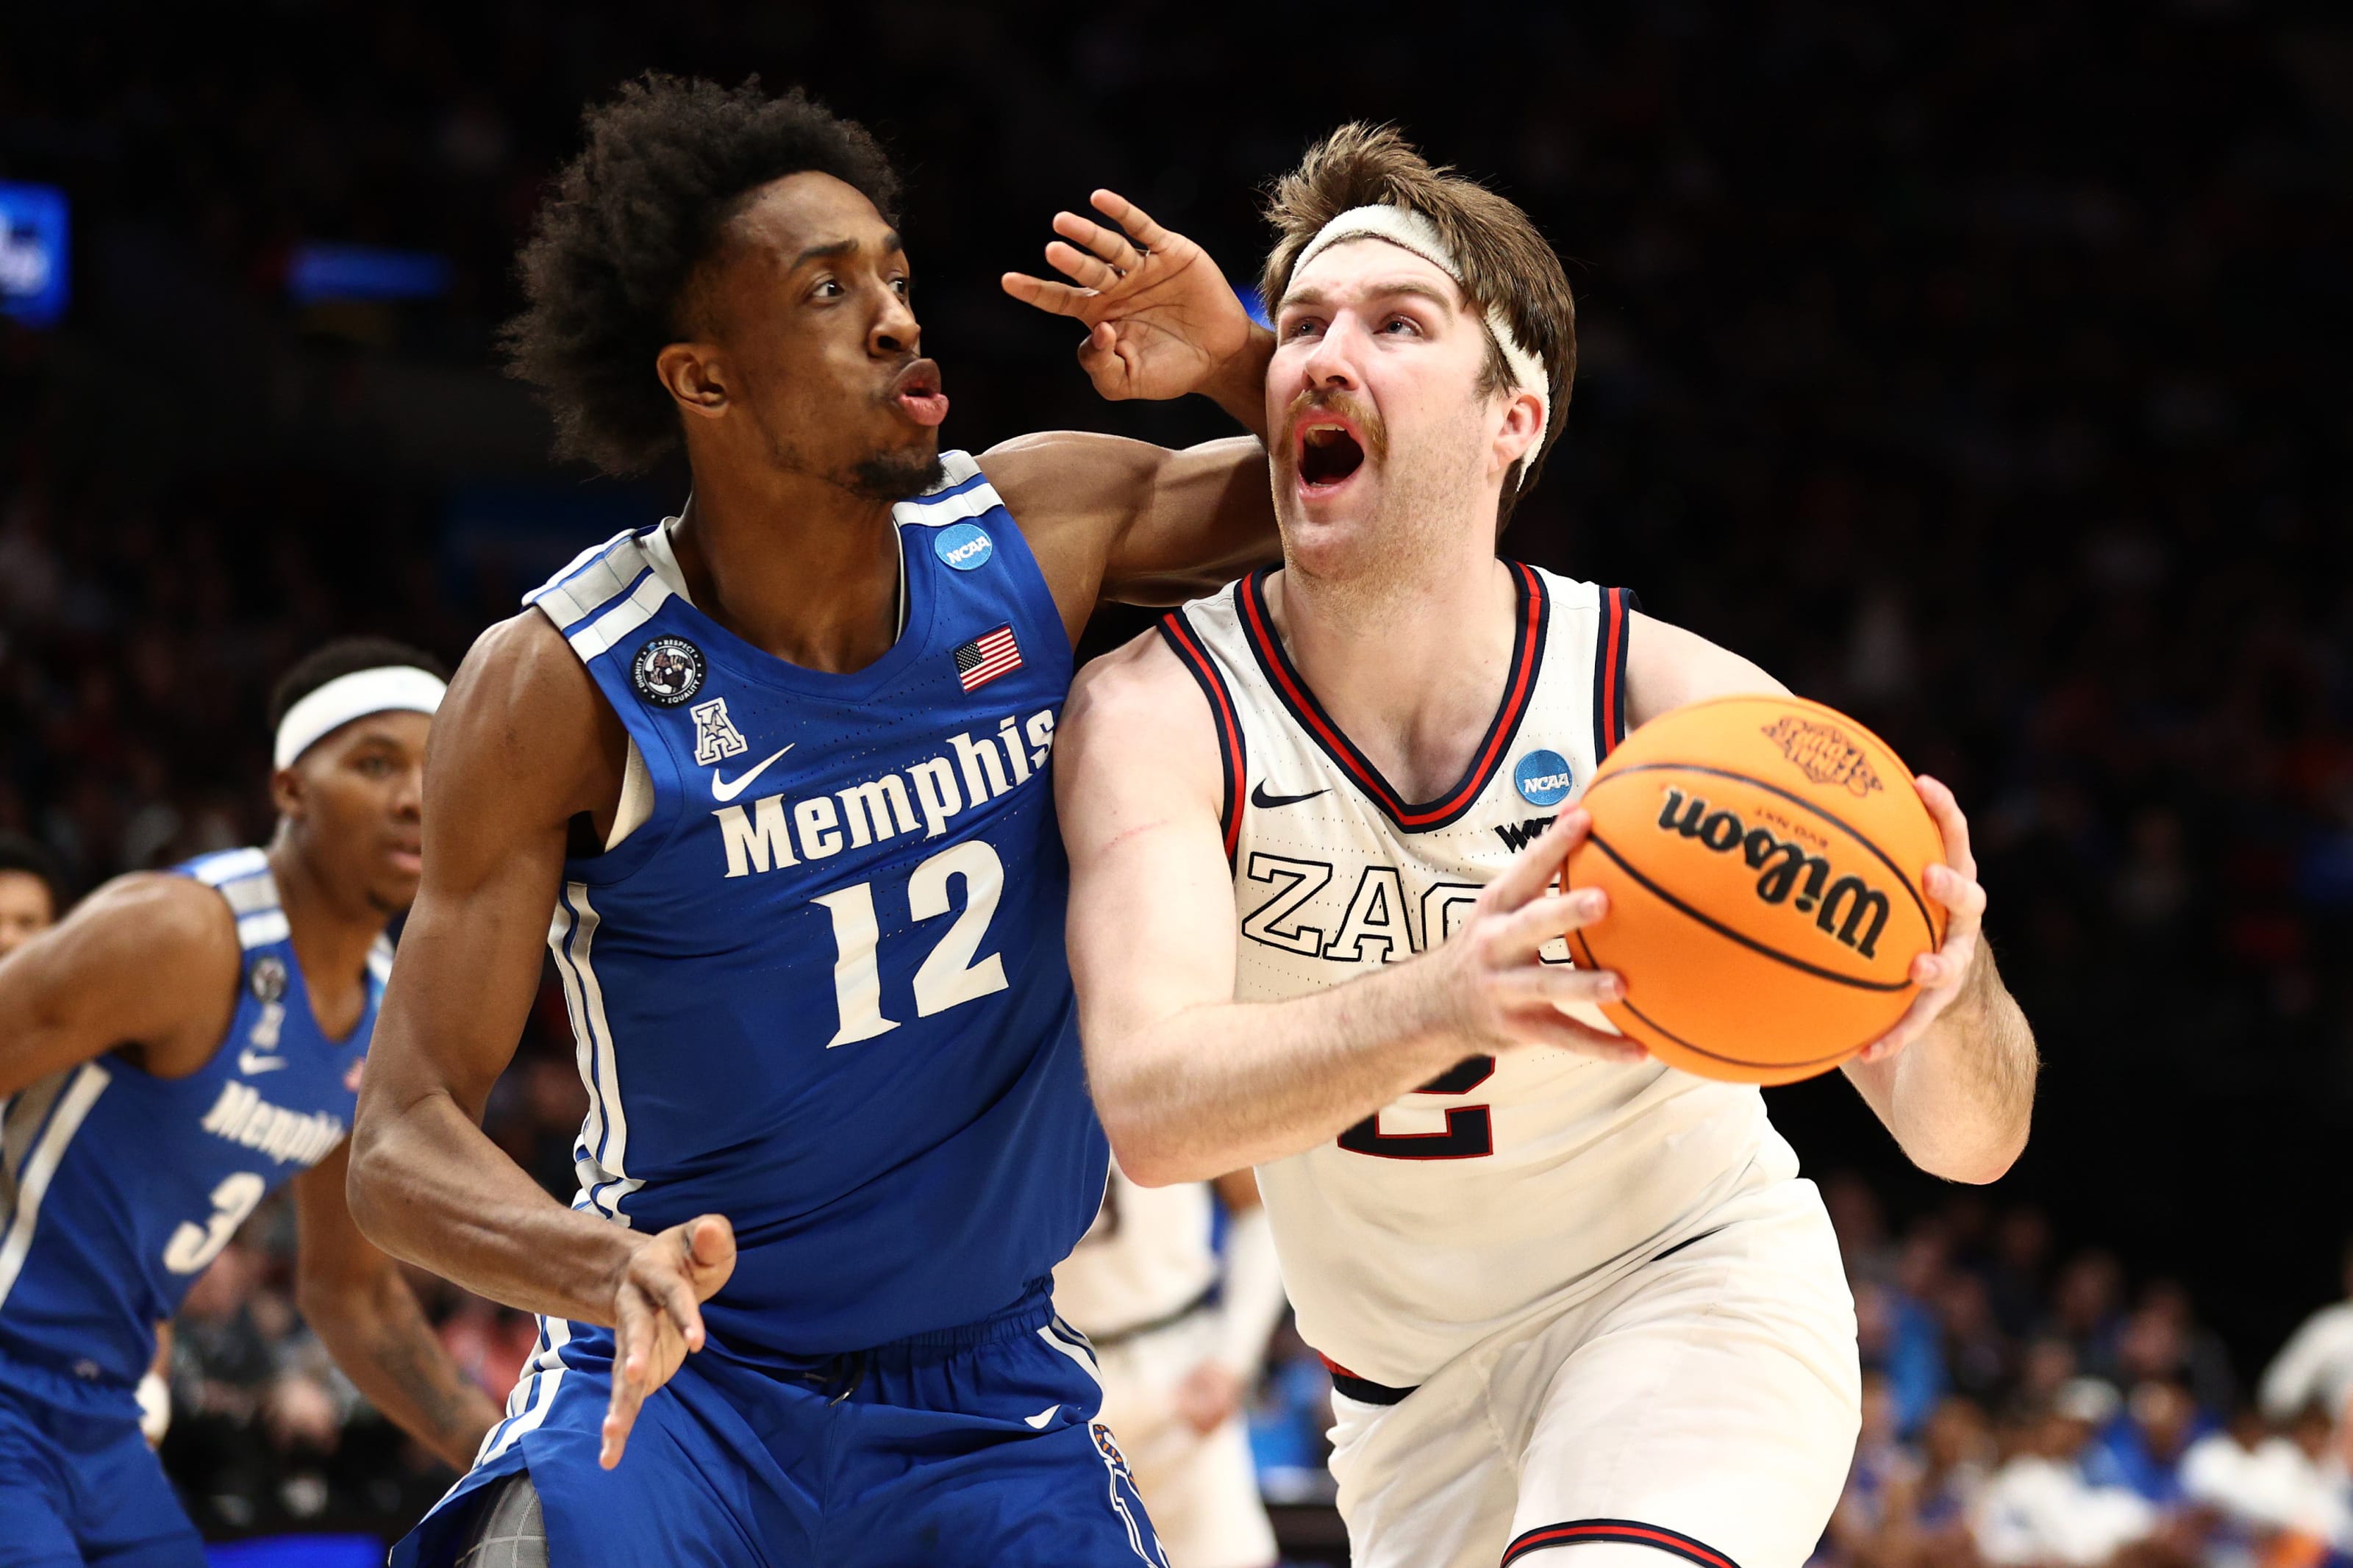 NBA Draft: Drew Timme improving stock in March Madness - Page 2